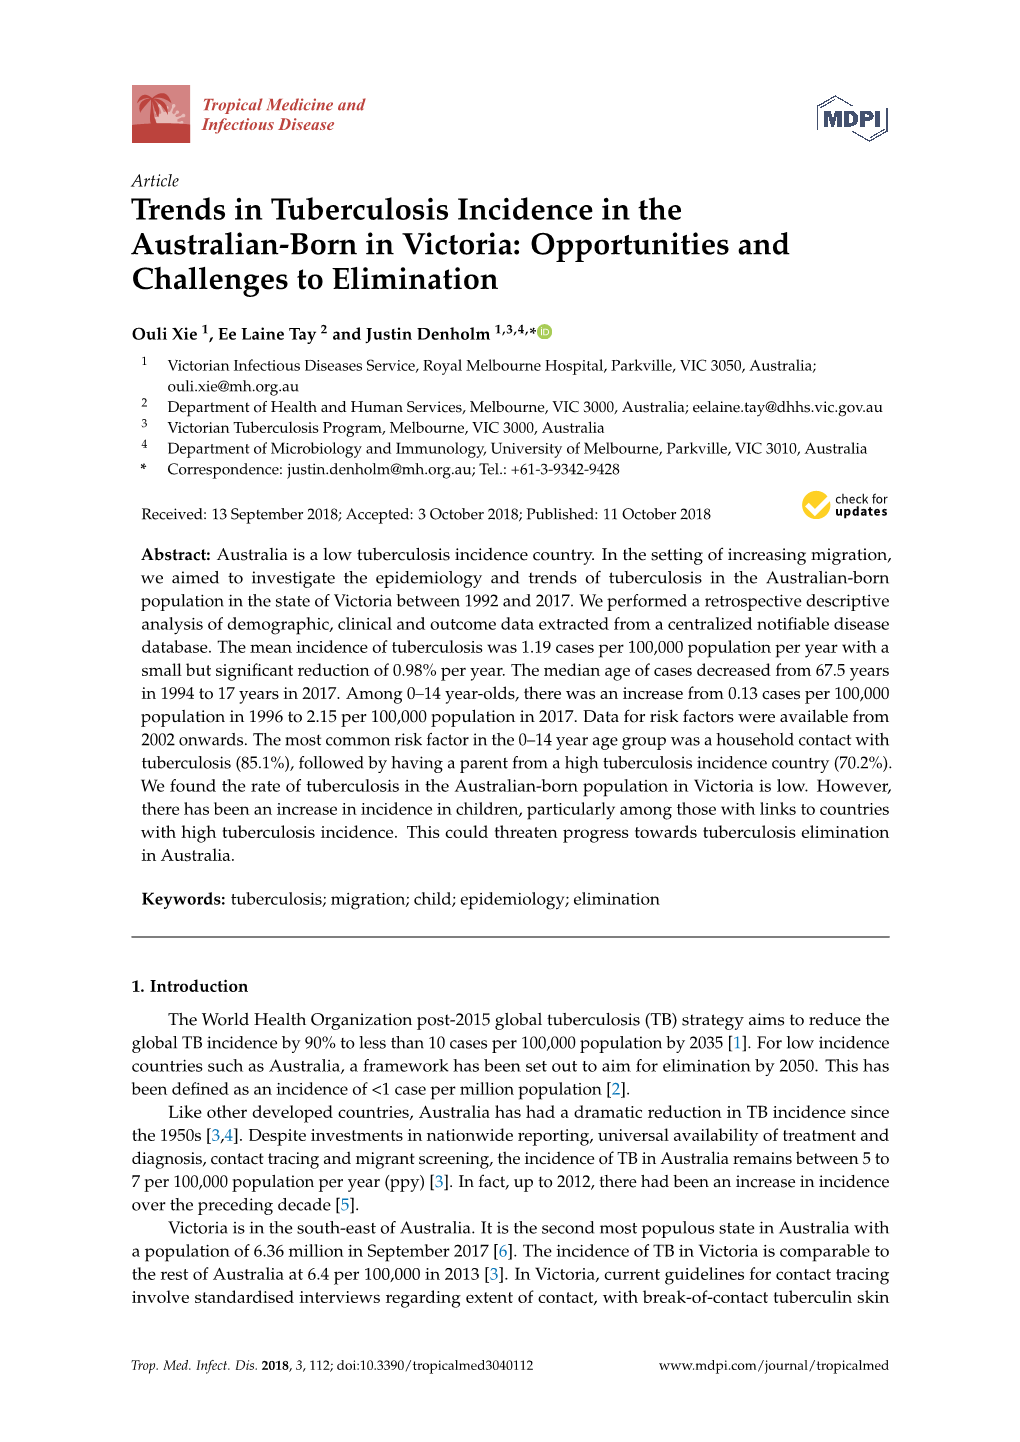 Trends in Tuberculosis Incidence in the Australian-Born in Victoria: Opportunities and Challenges to Elimination